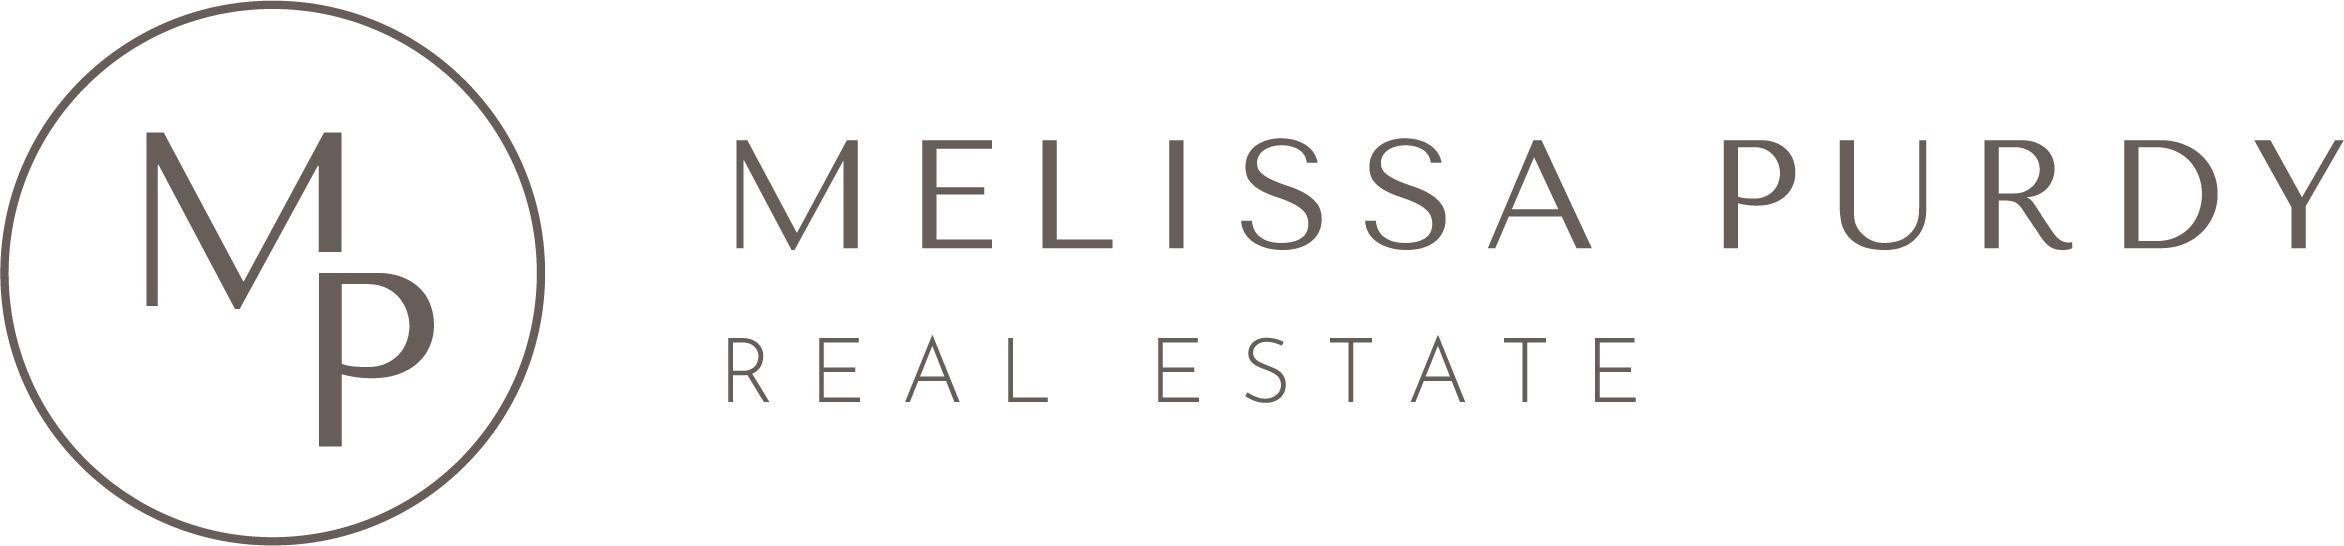 Melissa Purdy Real Estate